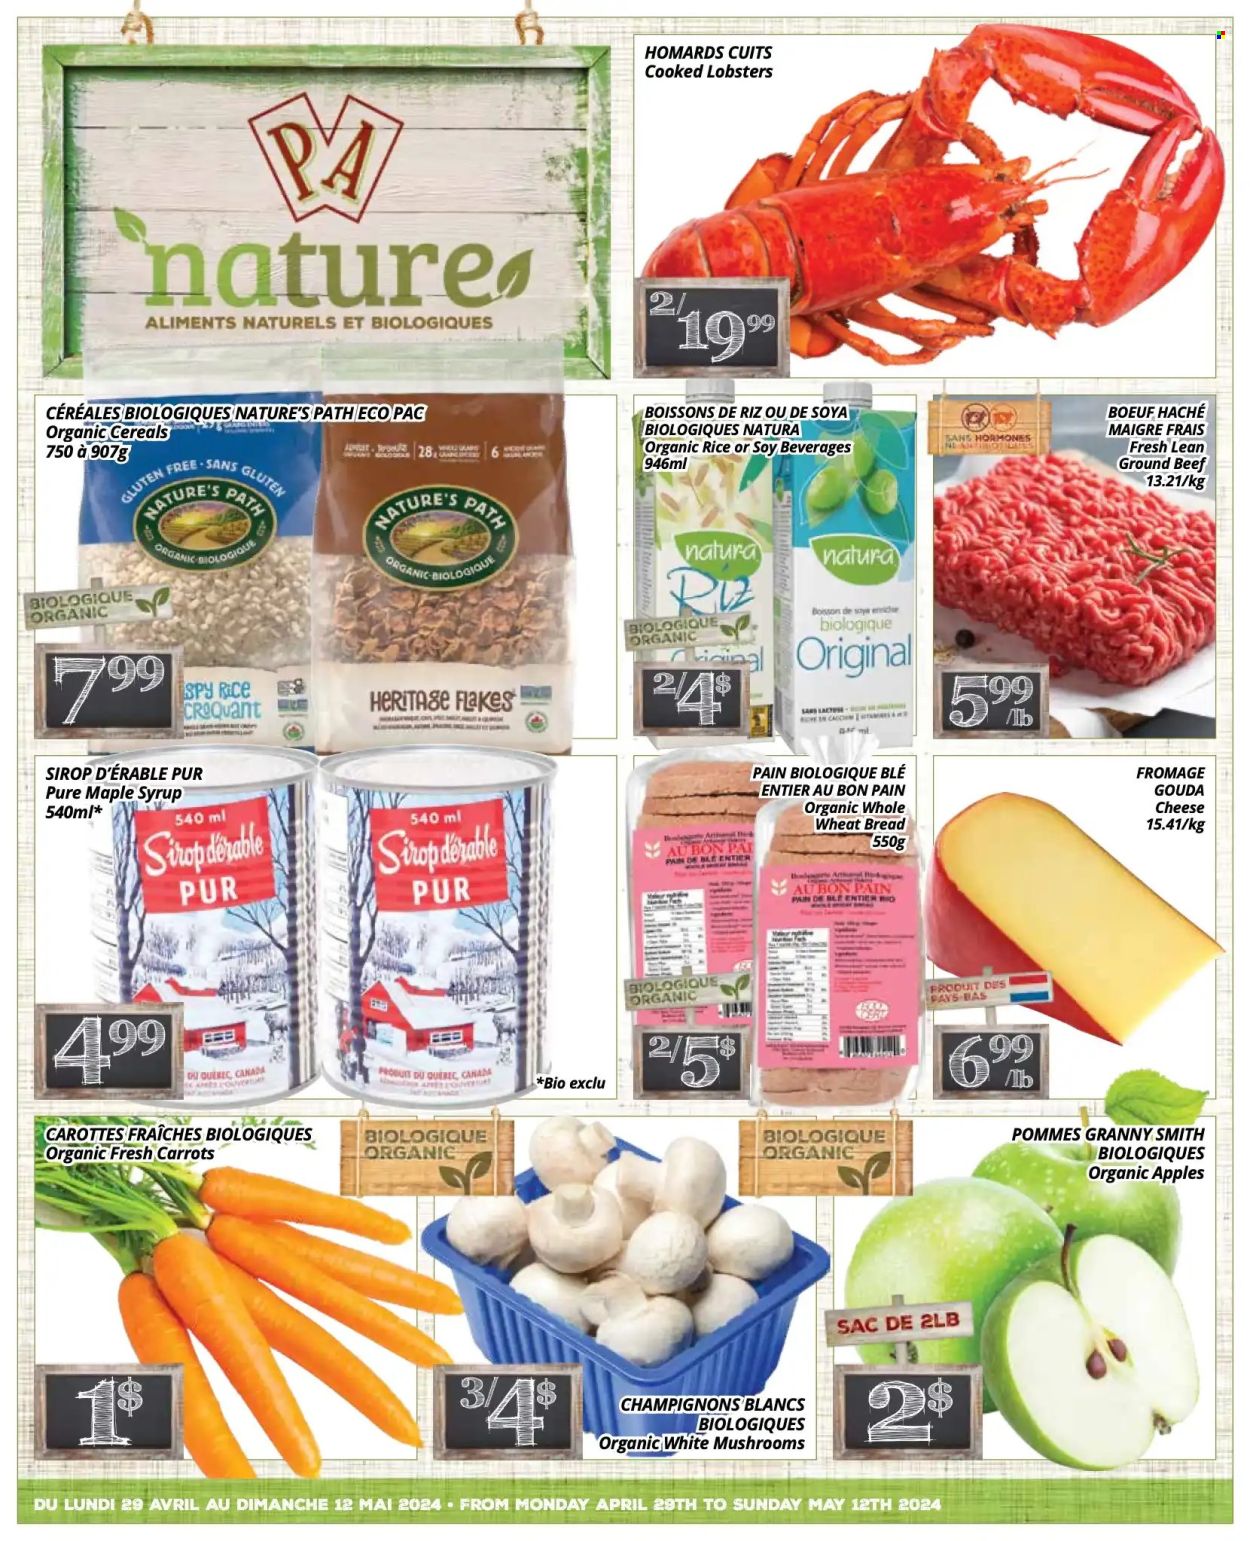 thumbnail - PA Nature Flyer - April 29, 2024 - May 12, 2024 - Sales products - mushrooms, bread, wheat bread, carrots, Granny Smith, lobster, plant based product, gouda, cheese, soy milk, cereals, maple syrup, syrup, beef meat, ground beef. Page 1.